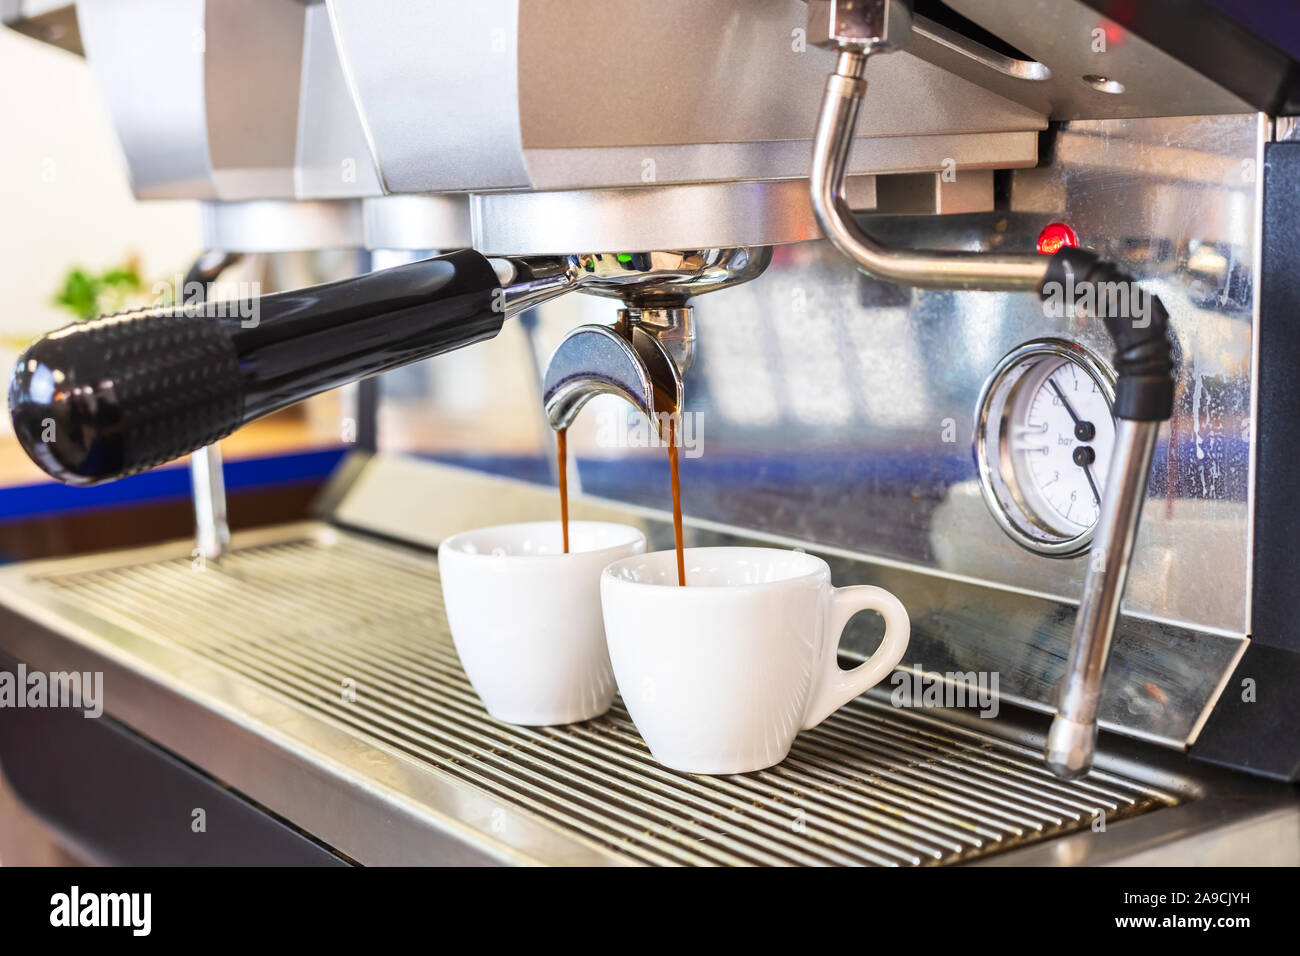 Espresso coffee machine brewing two shots in white cups, professional Italian equipment at restaurant or bar counter, close-up Stock Photo